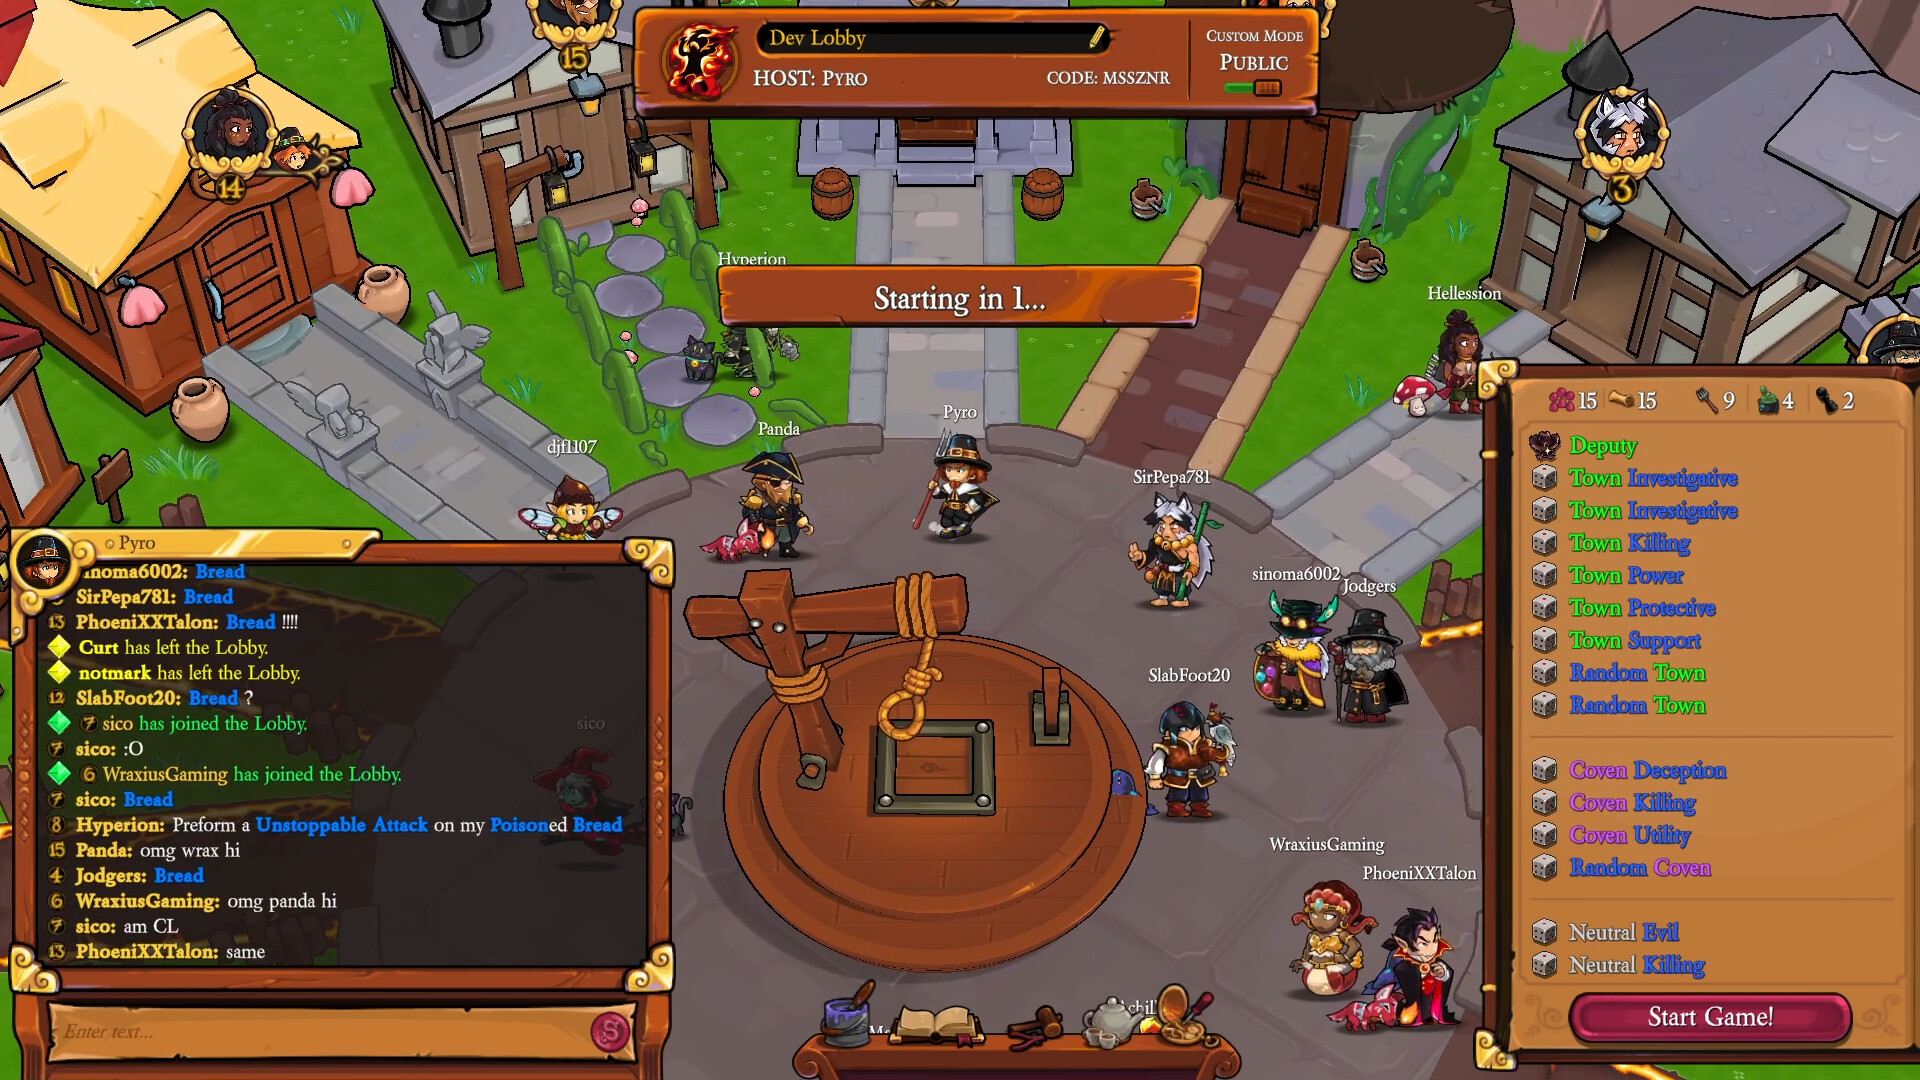 Town of Salem - Along with the Steam version coming out soon, we